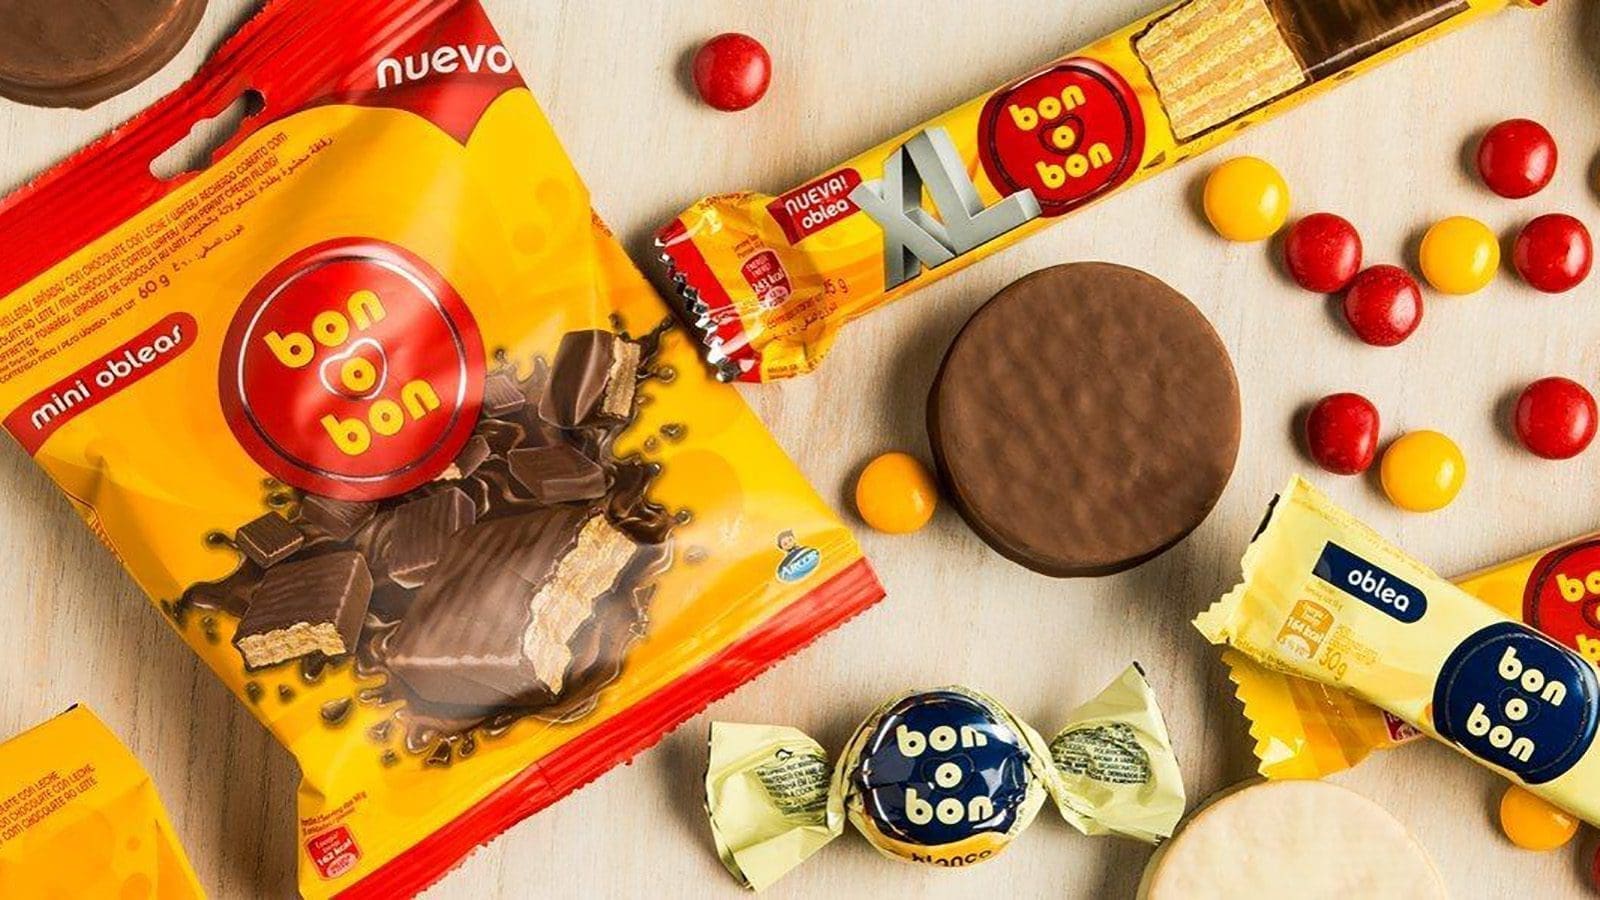 Webcor, Grupo Arco to hit sweet spot with opening of US$45 million confectionery factory